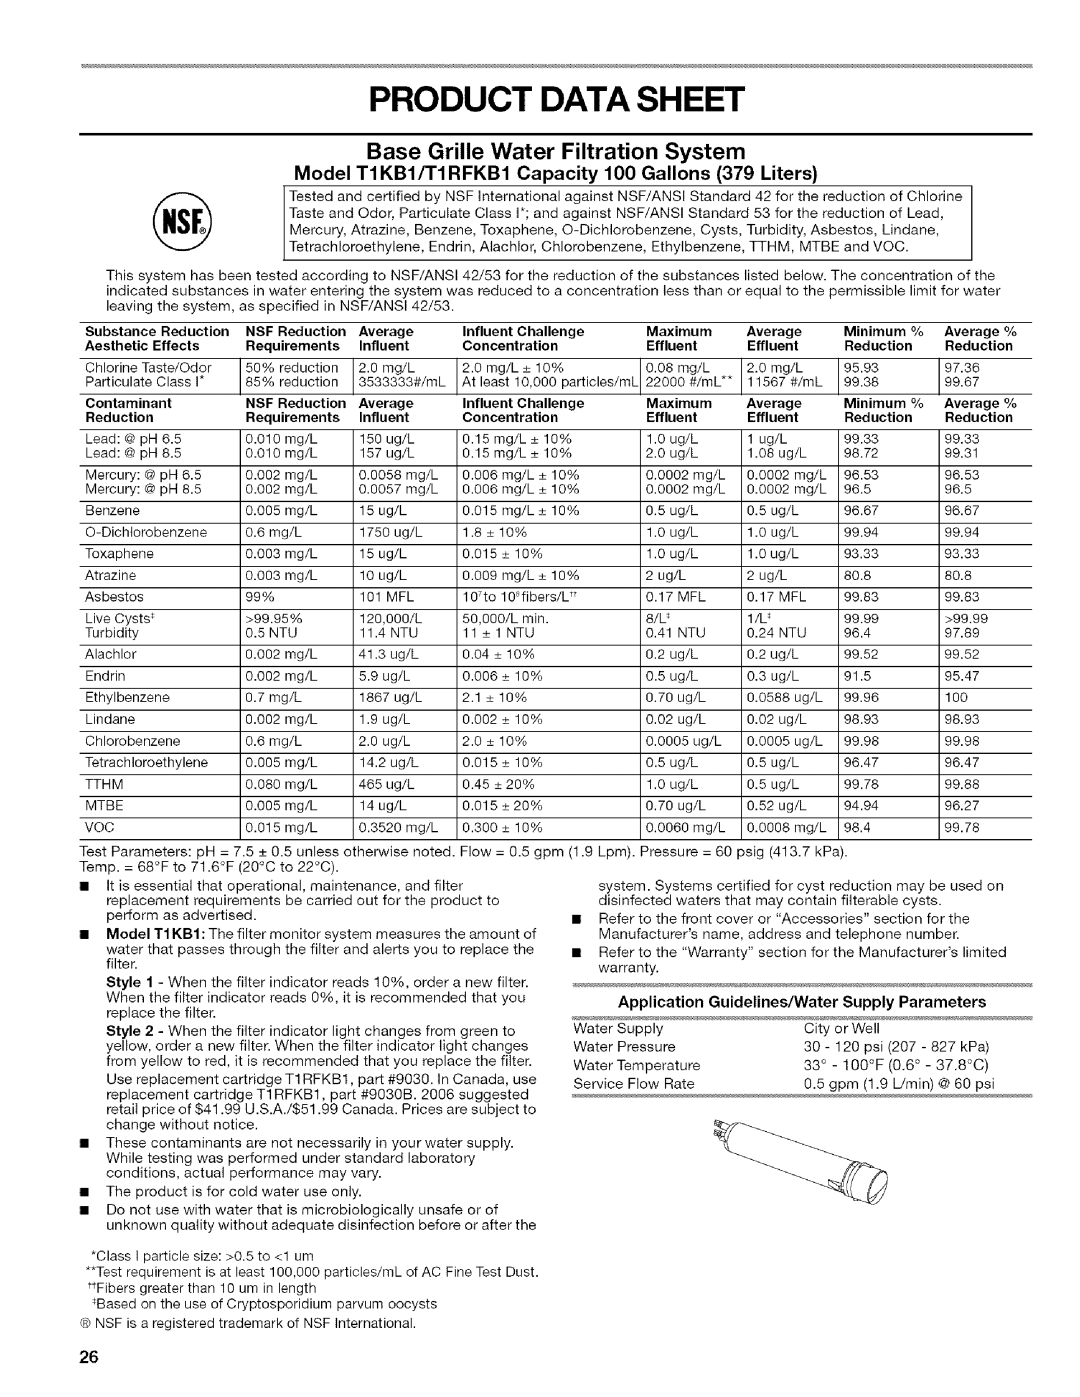 Kenmore 2318589 manual Product Data Sheet, Base Grille Water Filtration System 